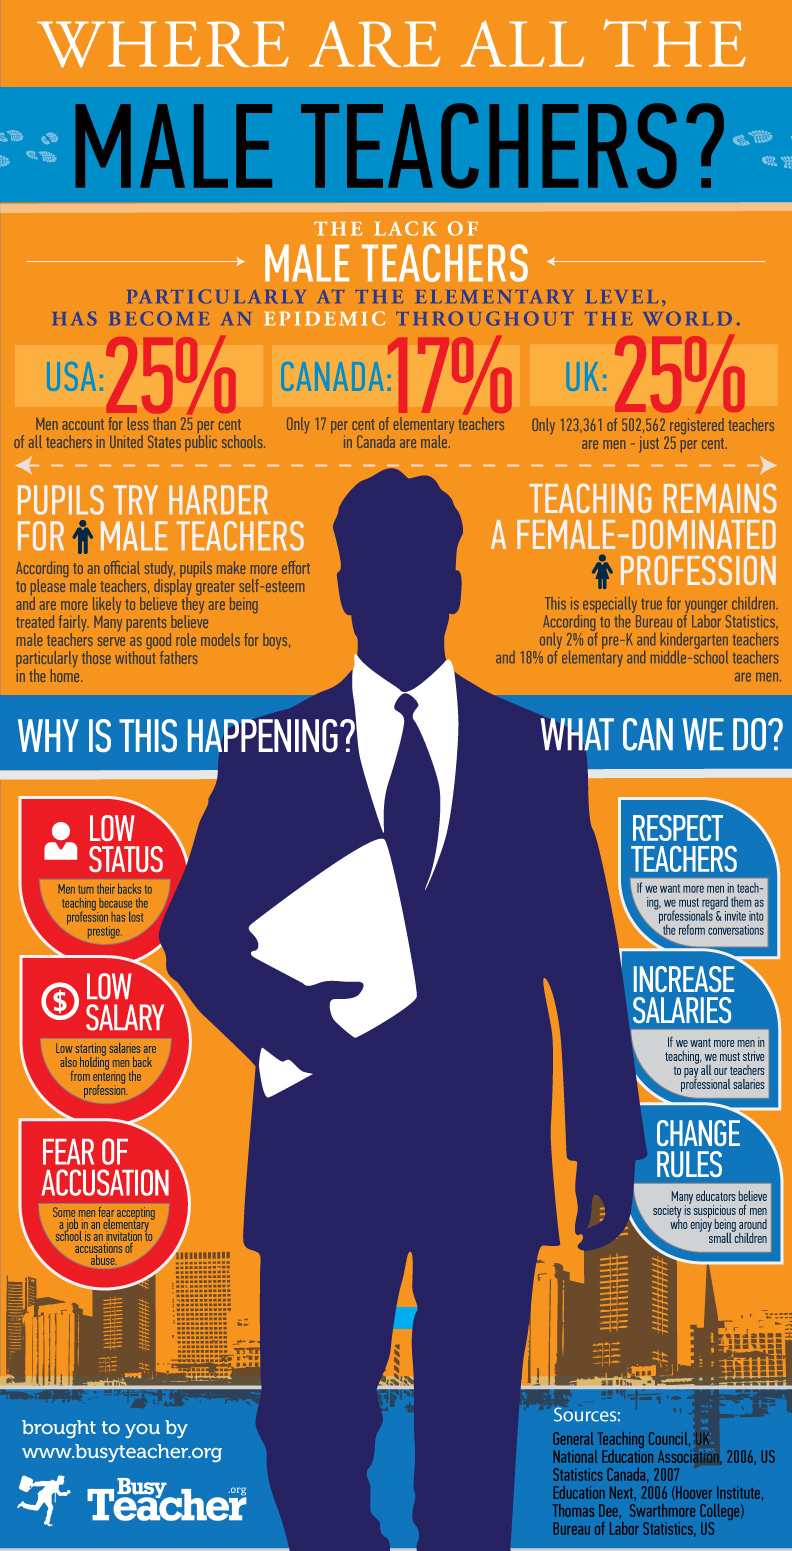 Where are all the male teachers?